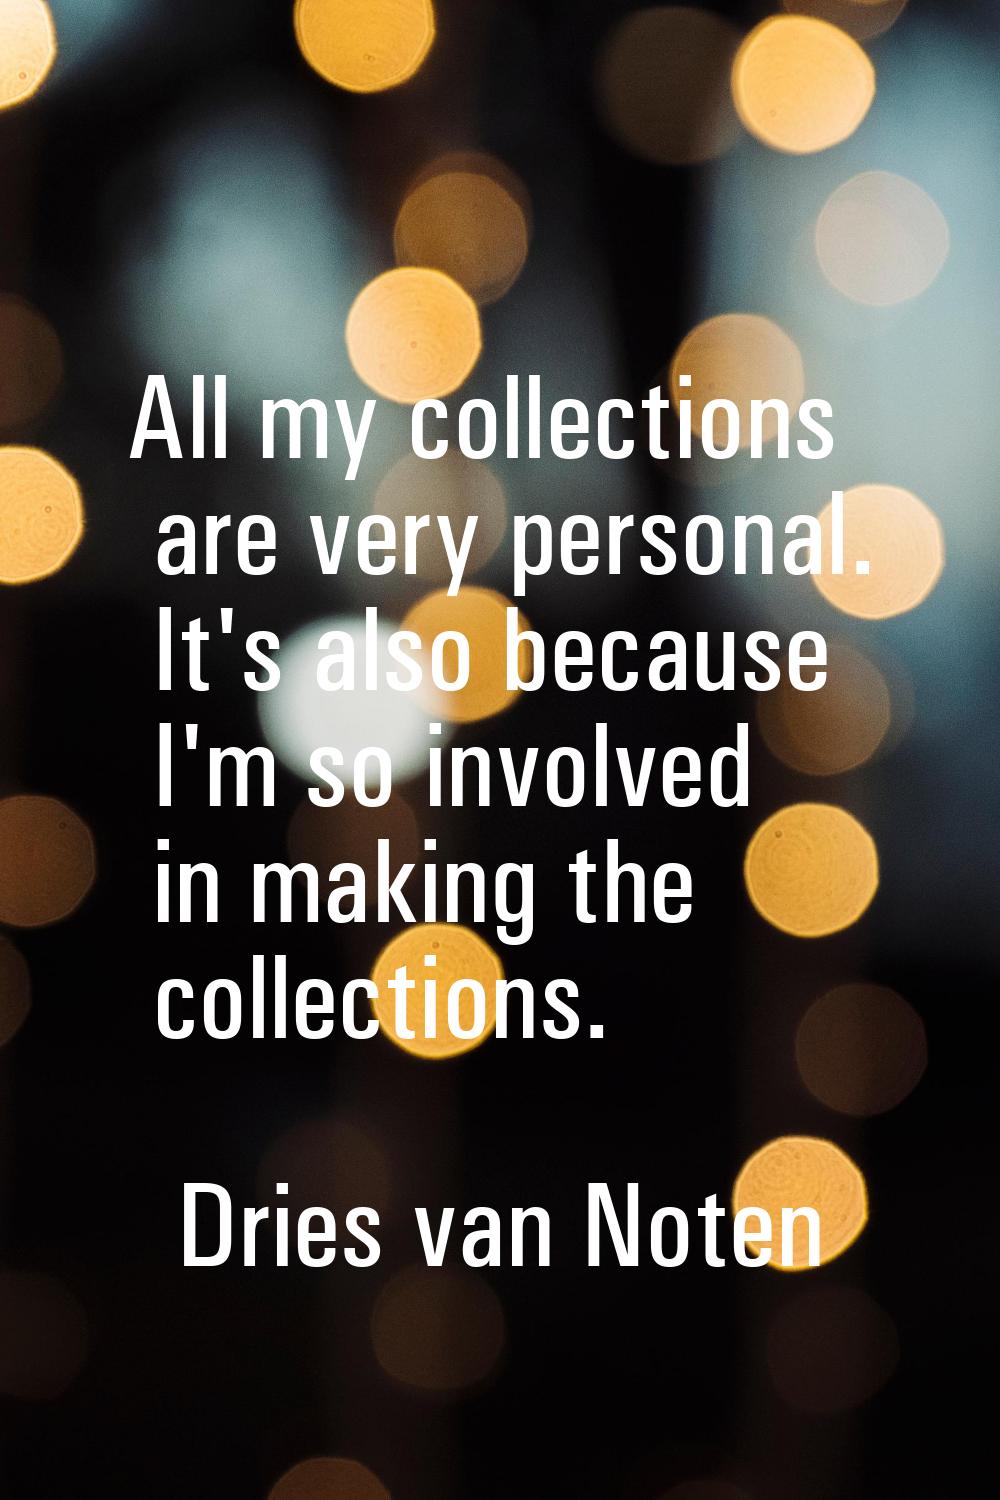 All my collections are very personal. It's also because I'm so involved in making the collections.